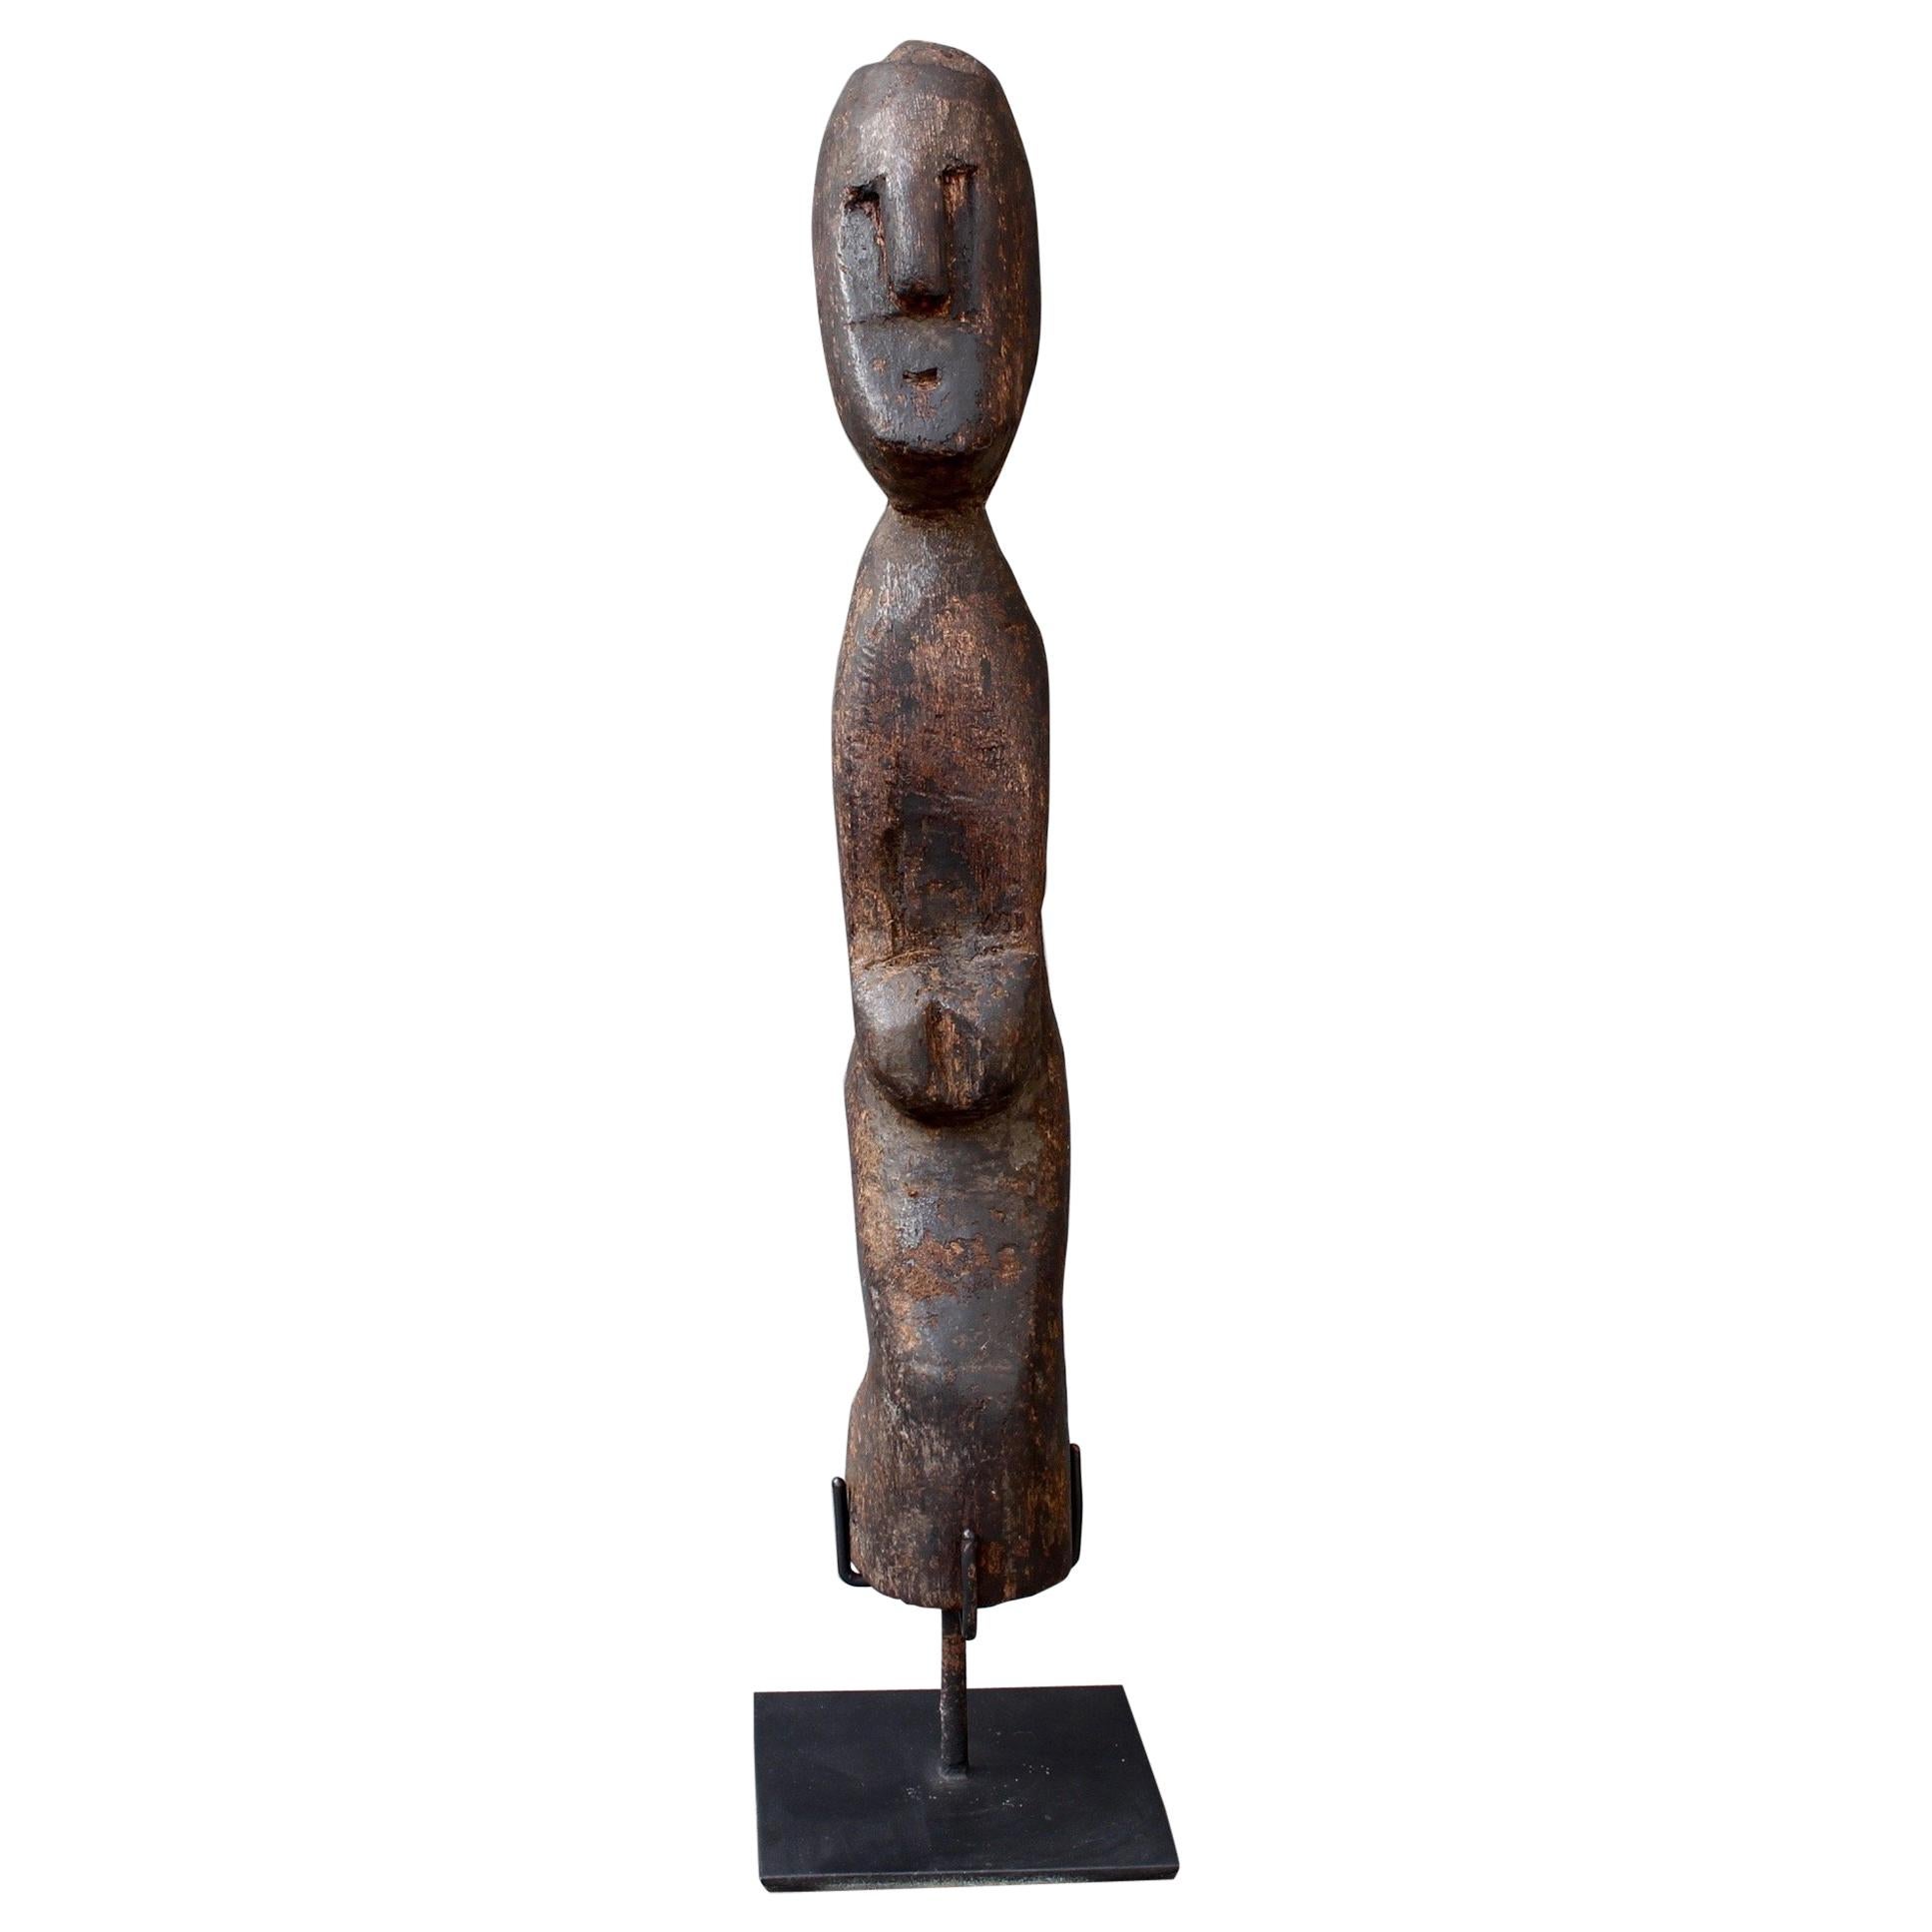 Wooden Carving / Sculpture of Kneeling Wooden Figure from Timor, Indonesia